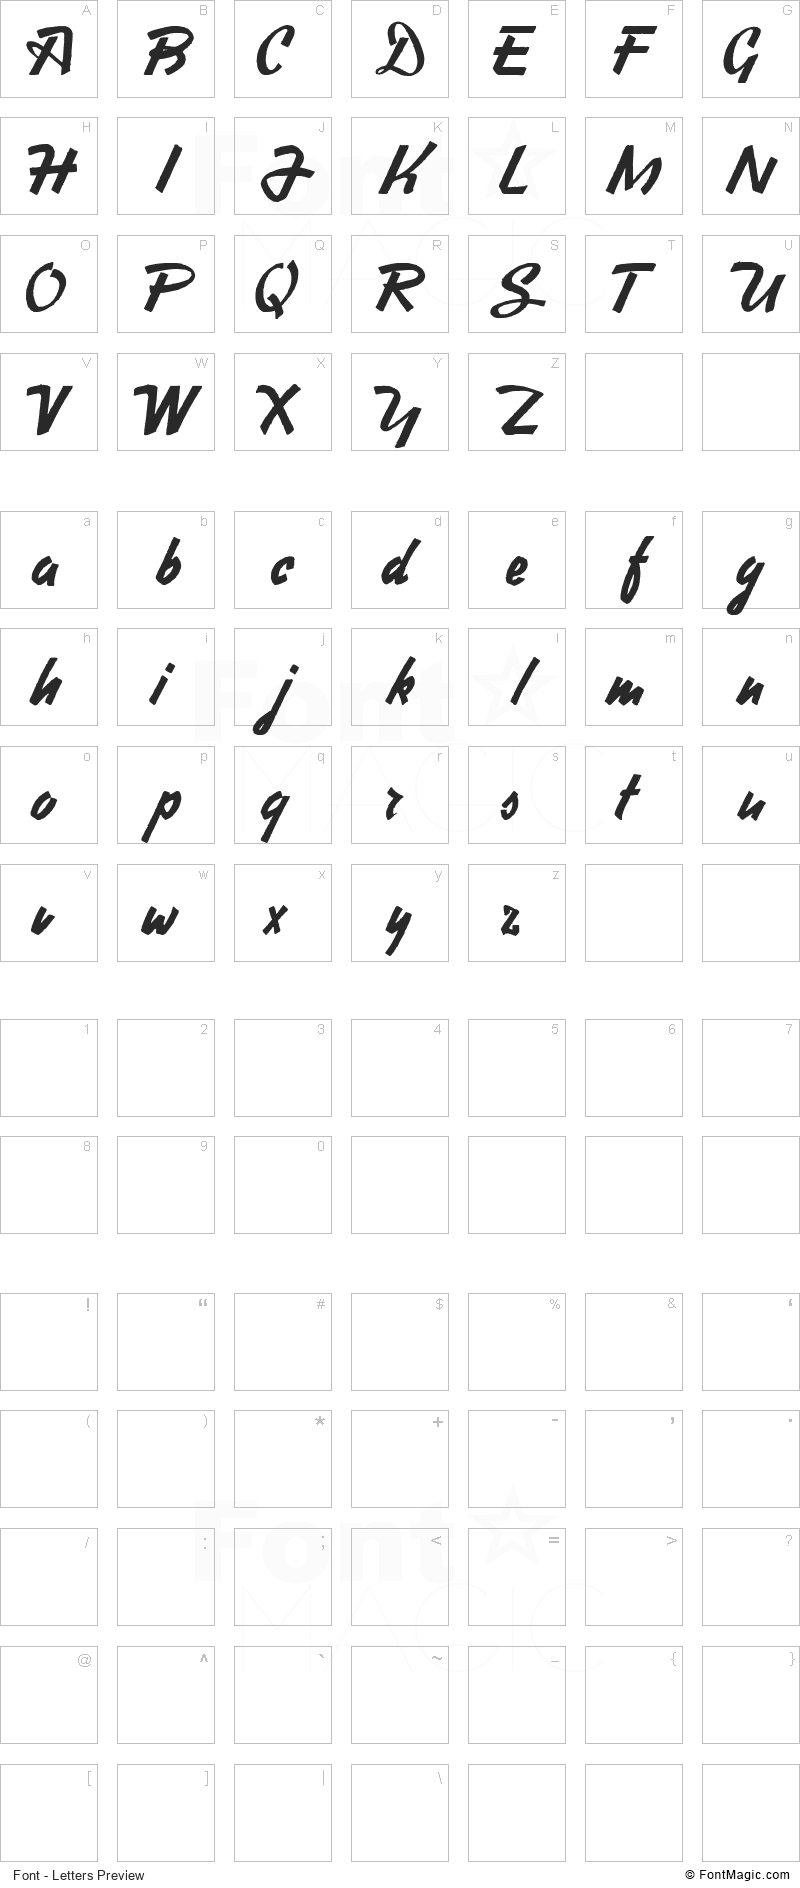 Heavy Squared Writing Font - All Latters Preview Chart